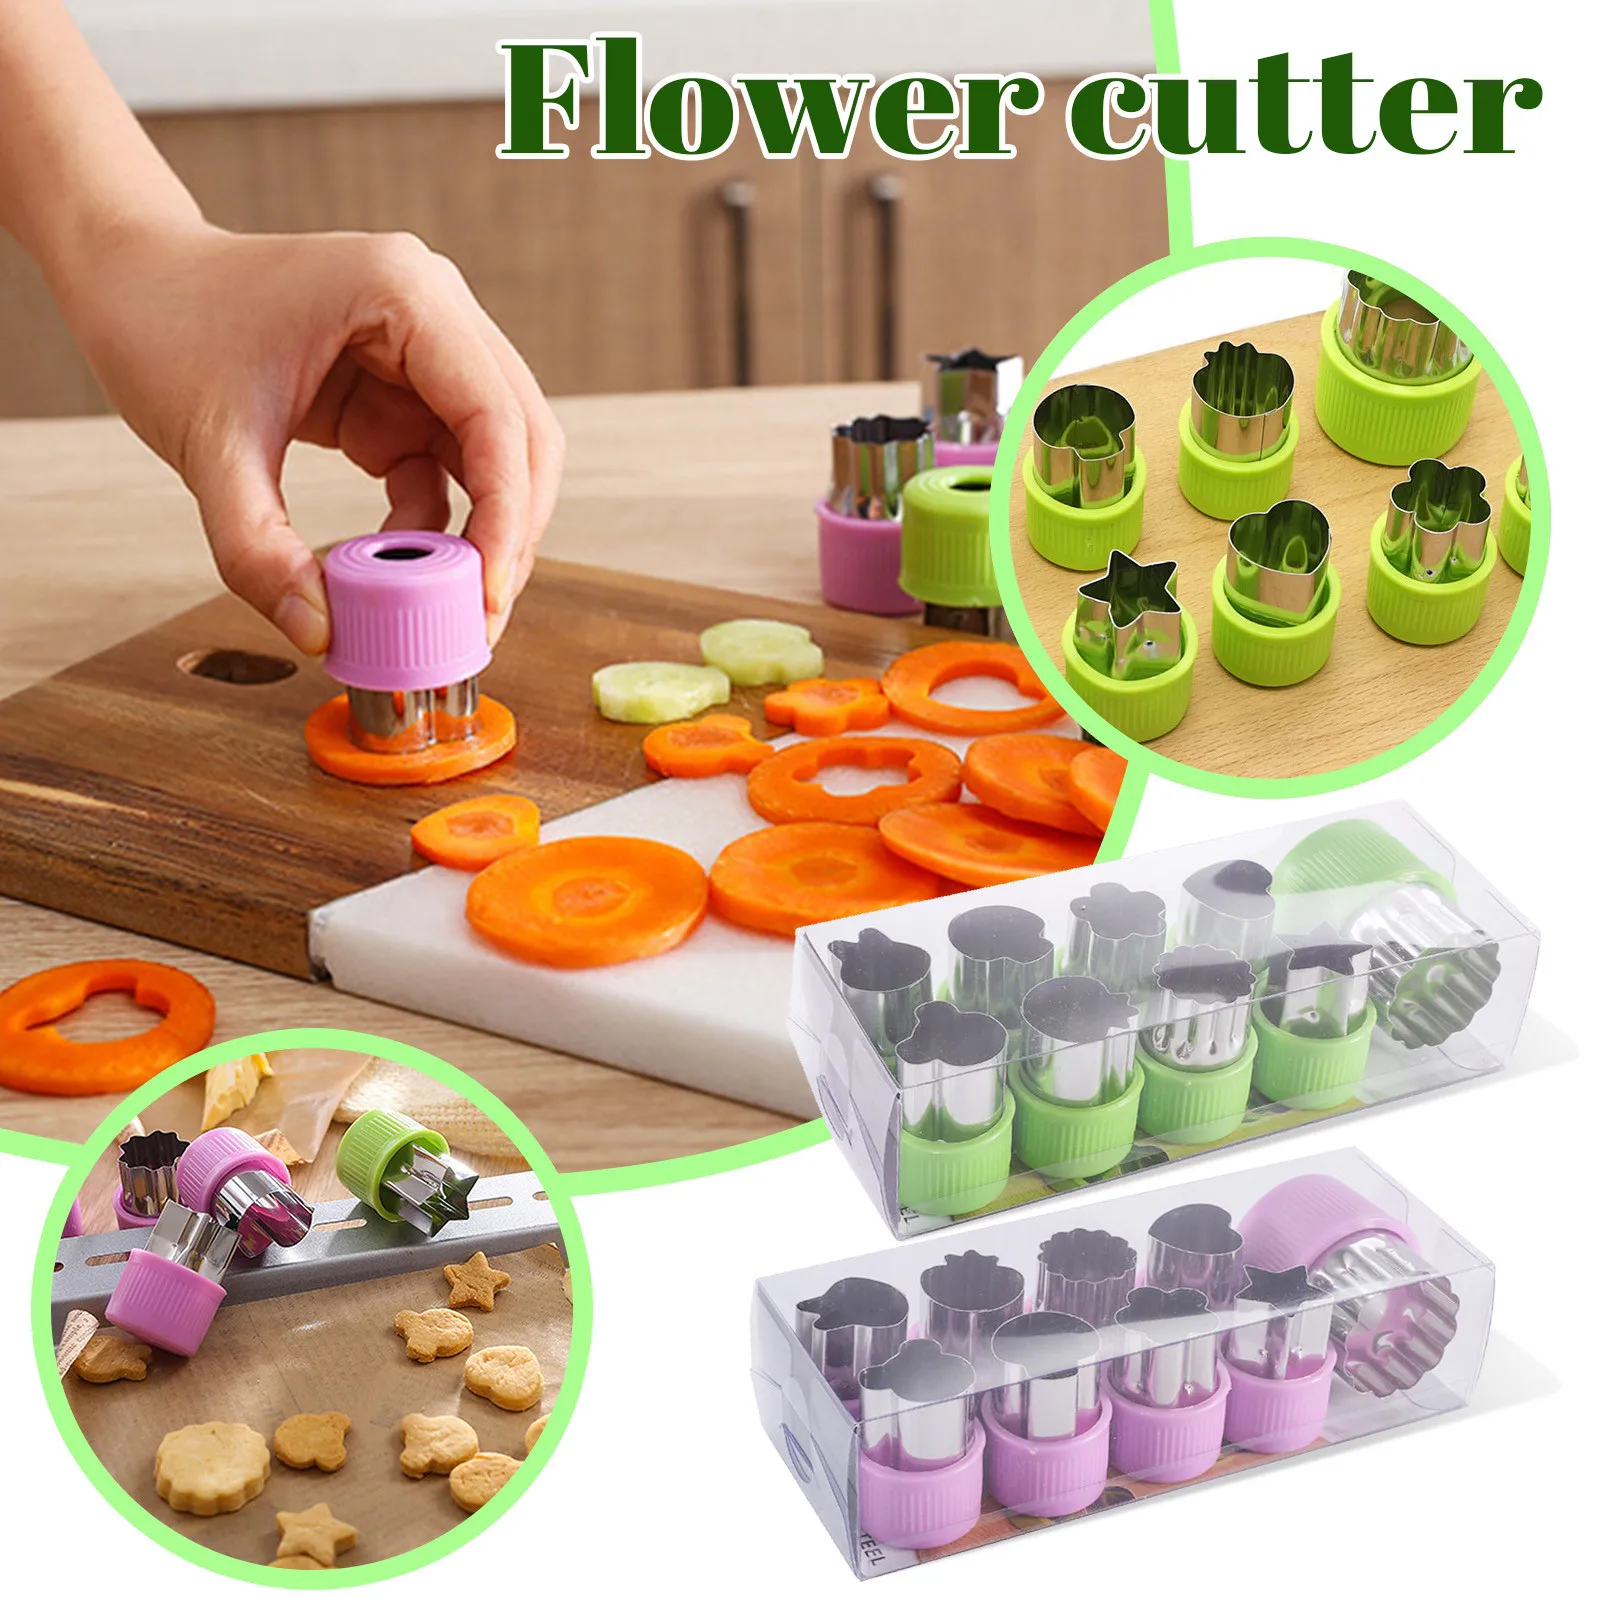 9 Pcs Vegetable Cutter Shapes Set, Mini Pie Cookie Cutters Fruit Pastry Stamps Mold For Kids Baking And Food Supplement Tools